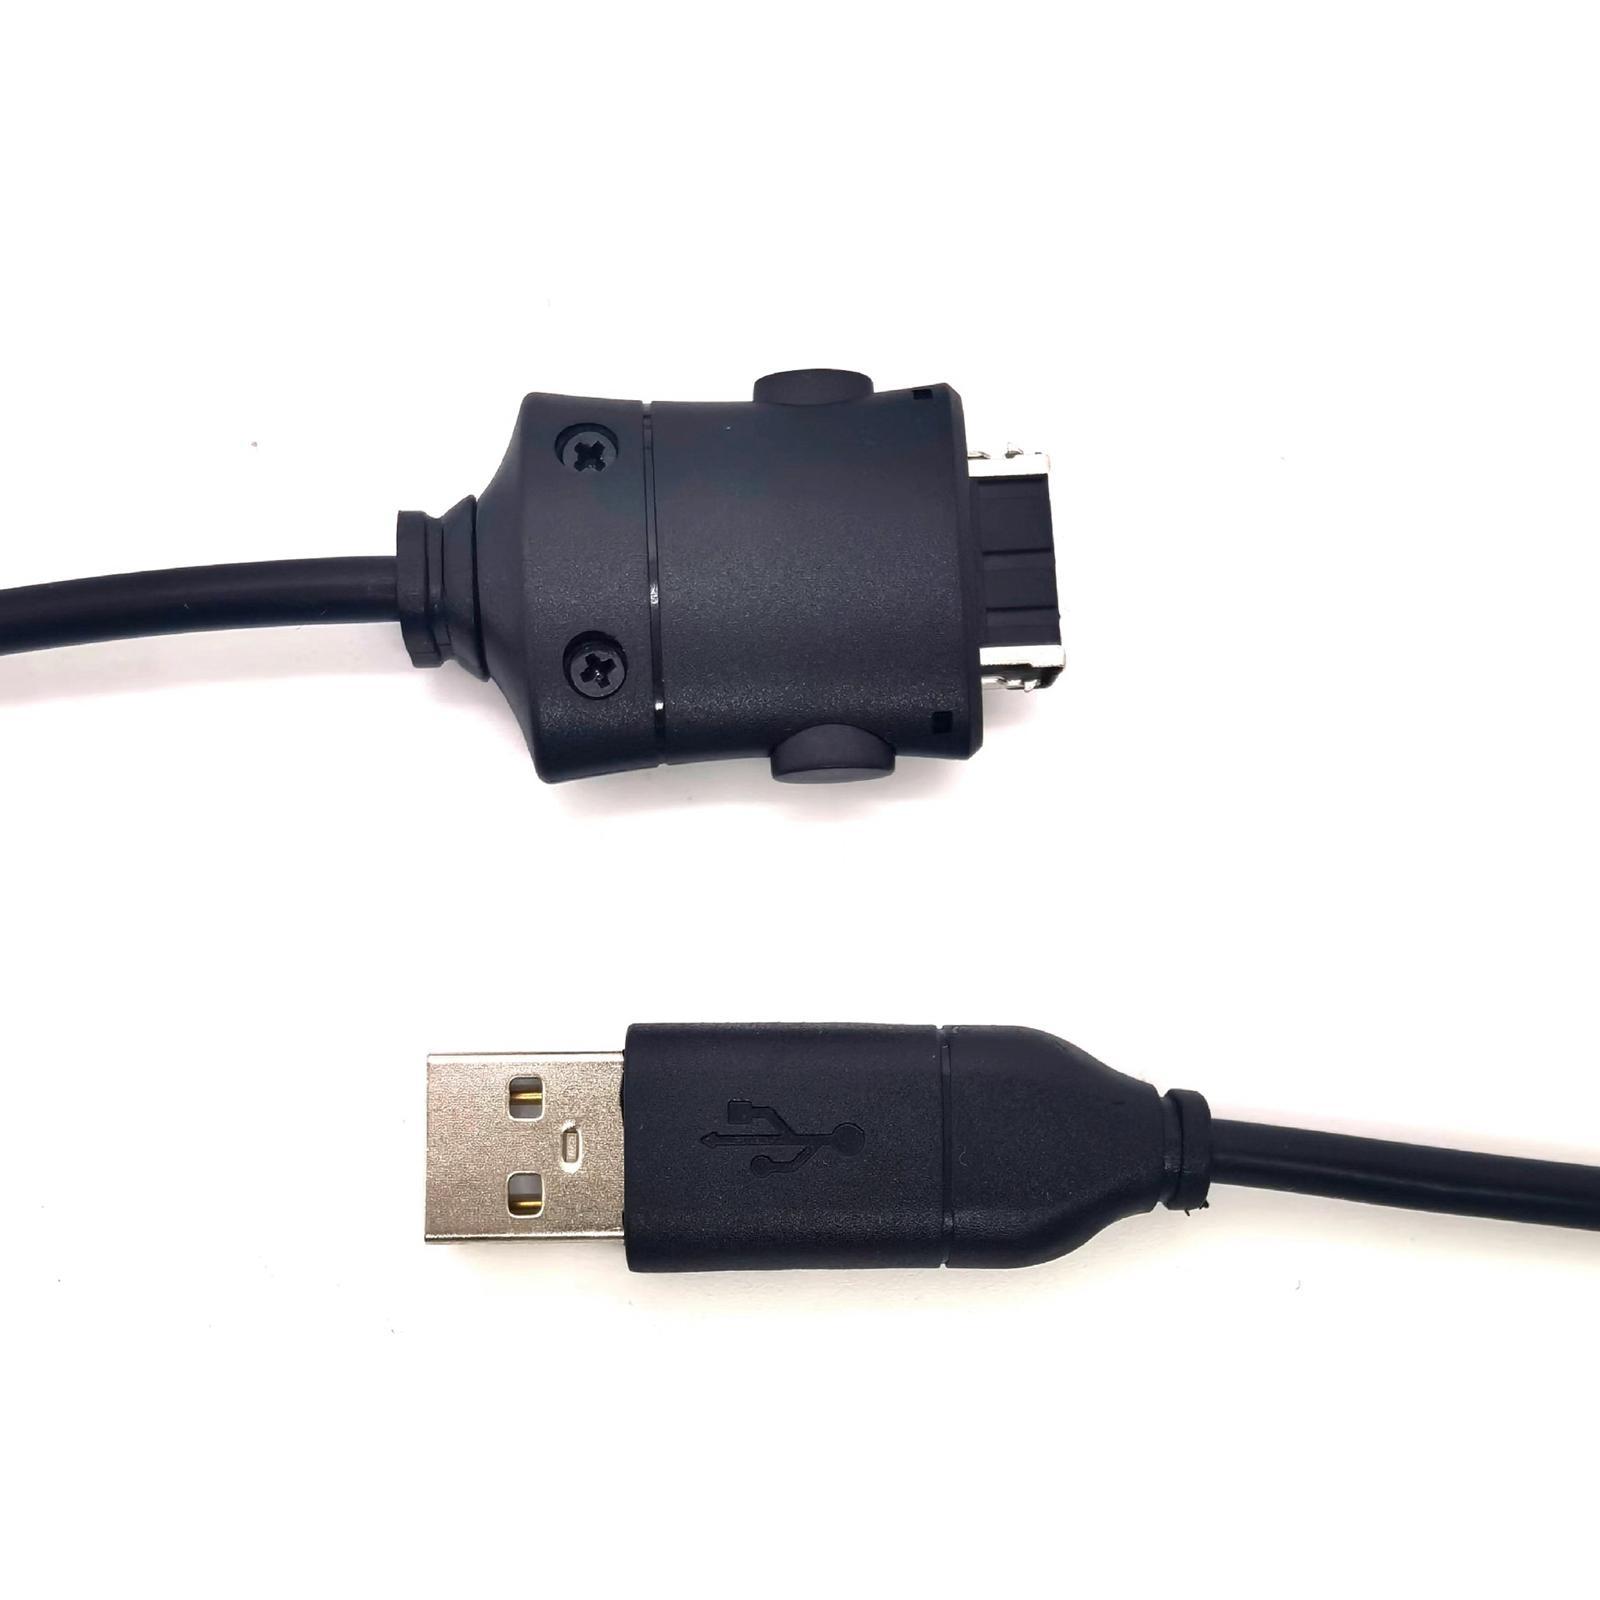 Suc USB Data Charging Cable Cord ,1.5M, Durable, Easy to Use, Spare Parts Black Replacement Transfer Cord for Digital Camera L83T L830 i6 L74